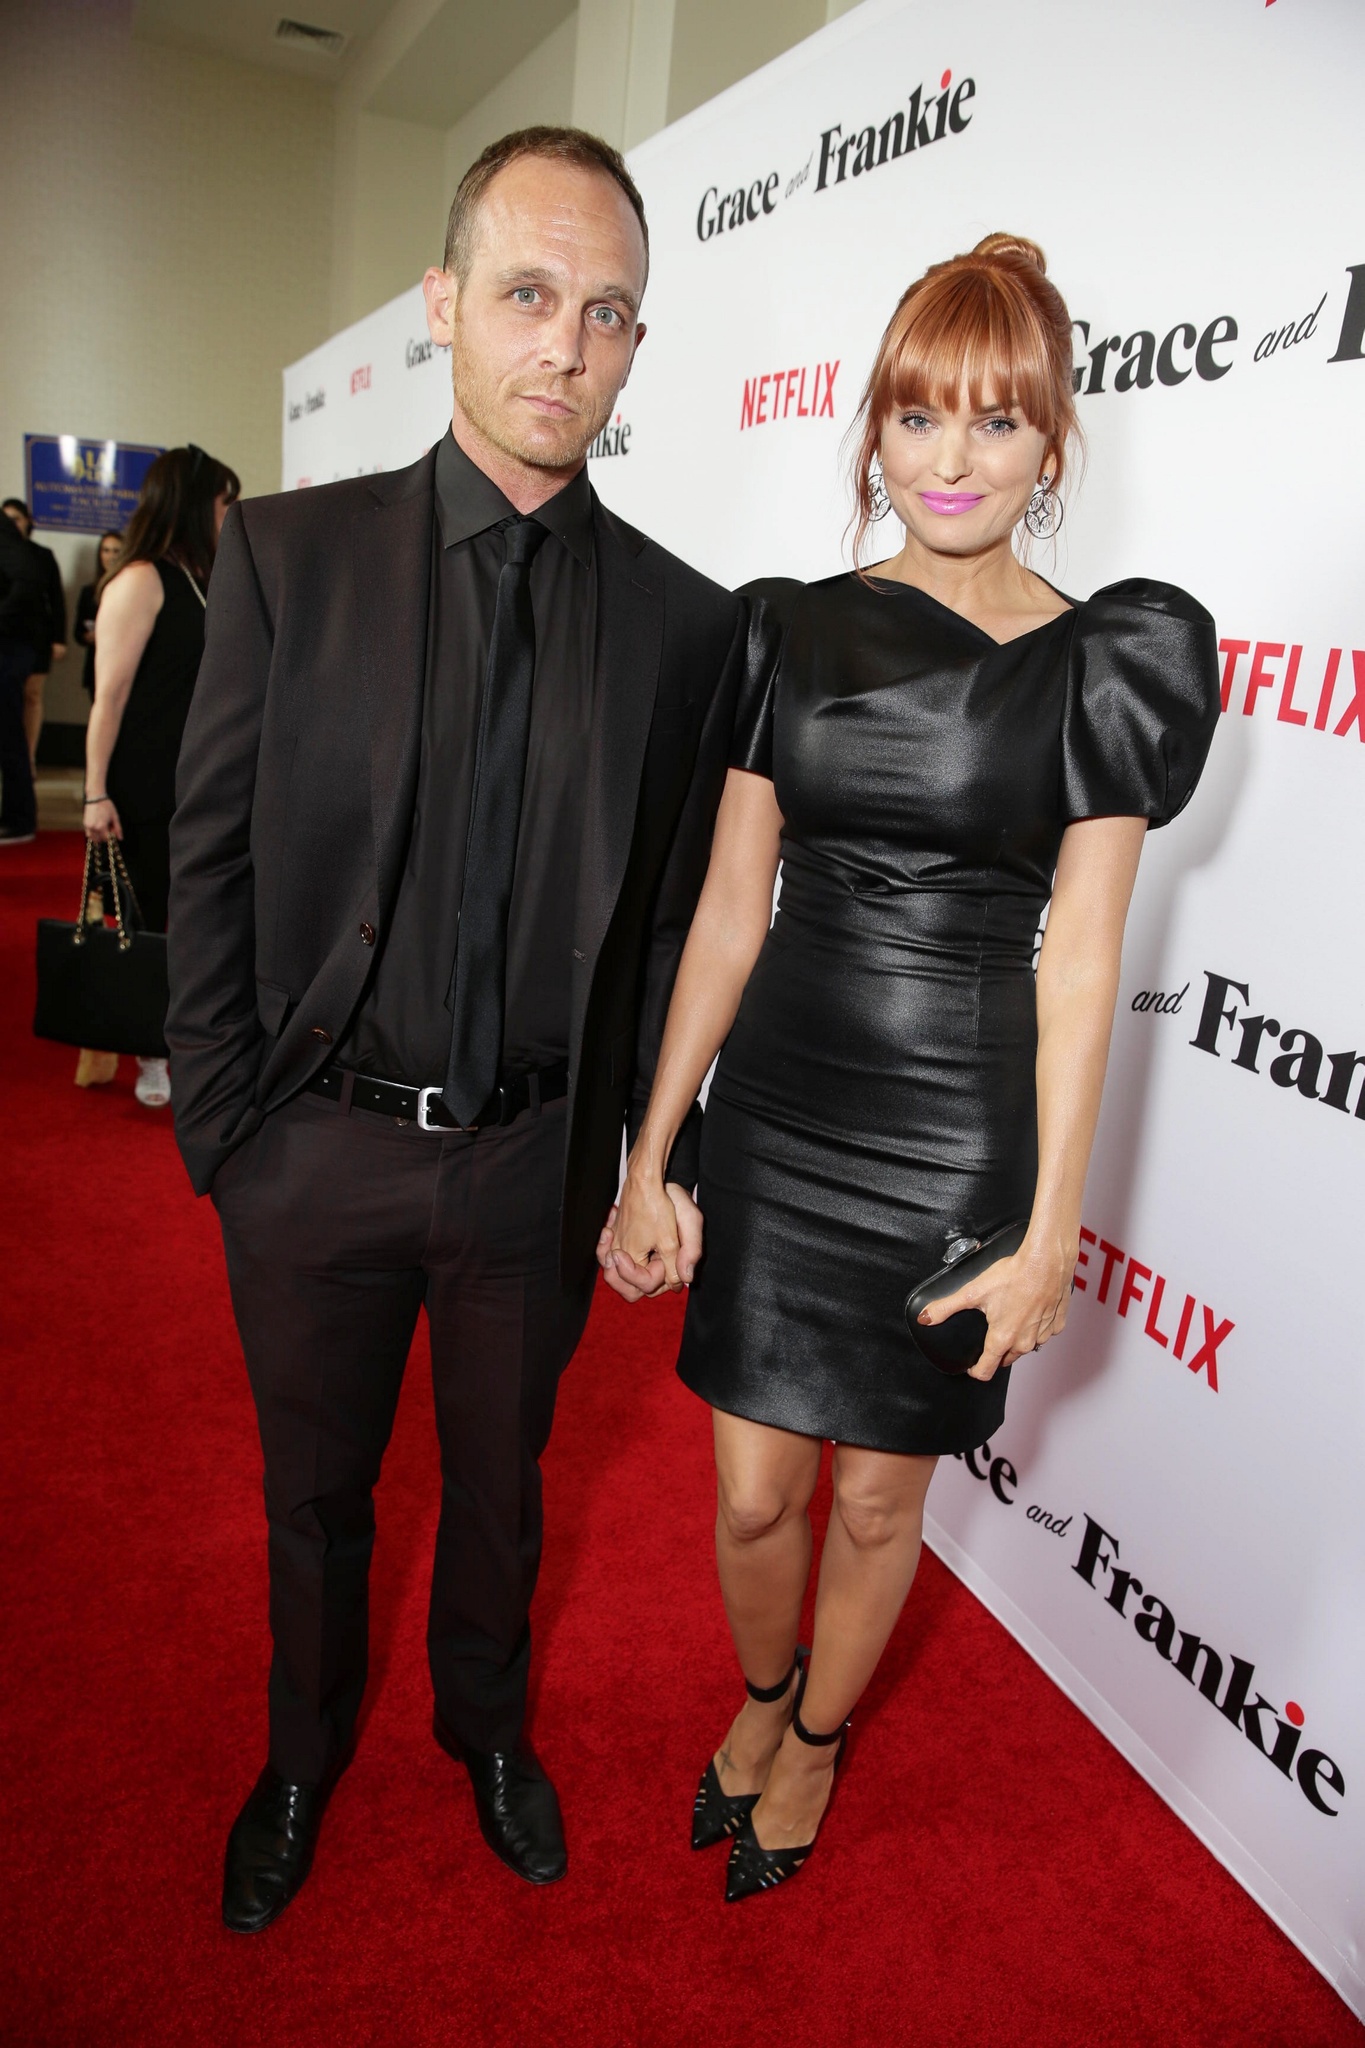 Ethan Embry and Sunny Mabrey at event of Grace and Frankie (2015)